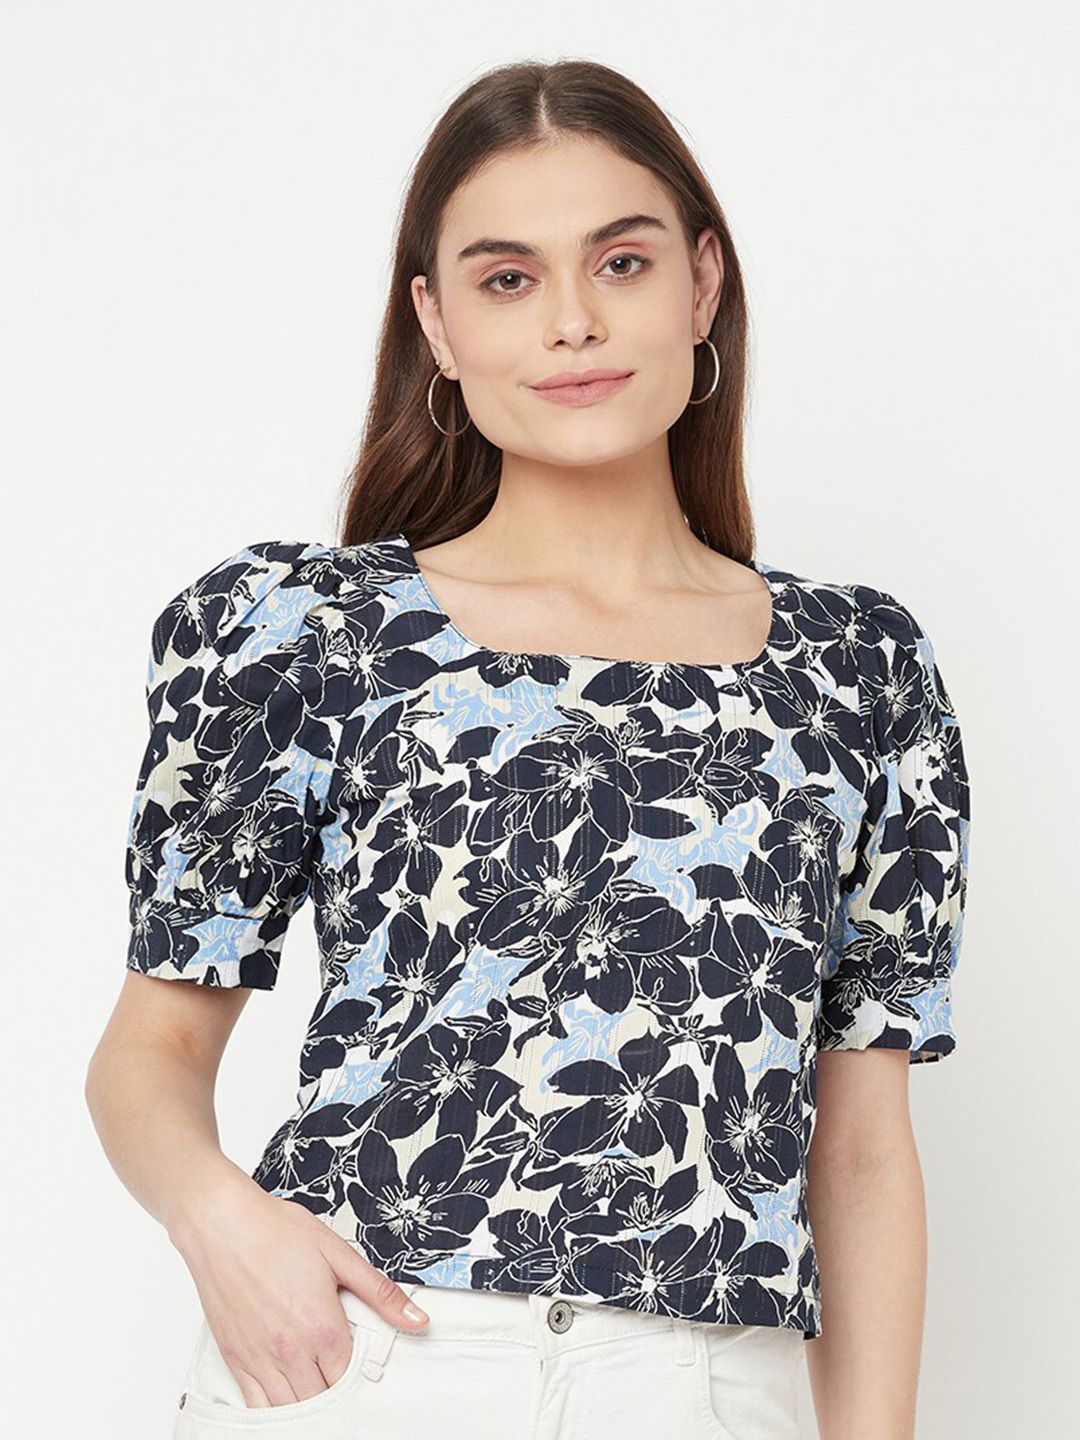 RAASSIO Floral Print Pure Cotton Crop Top Price in India